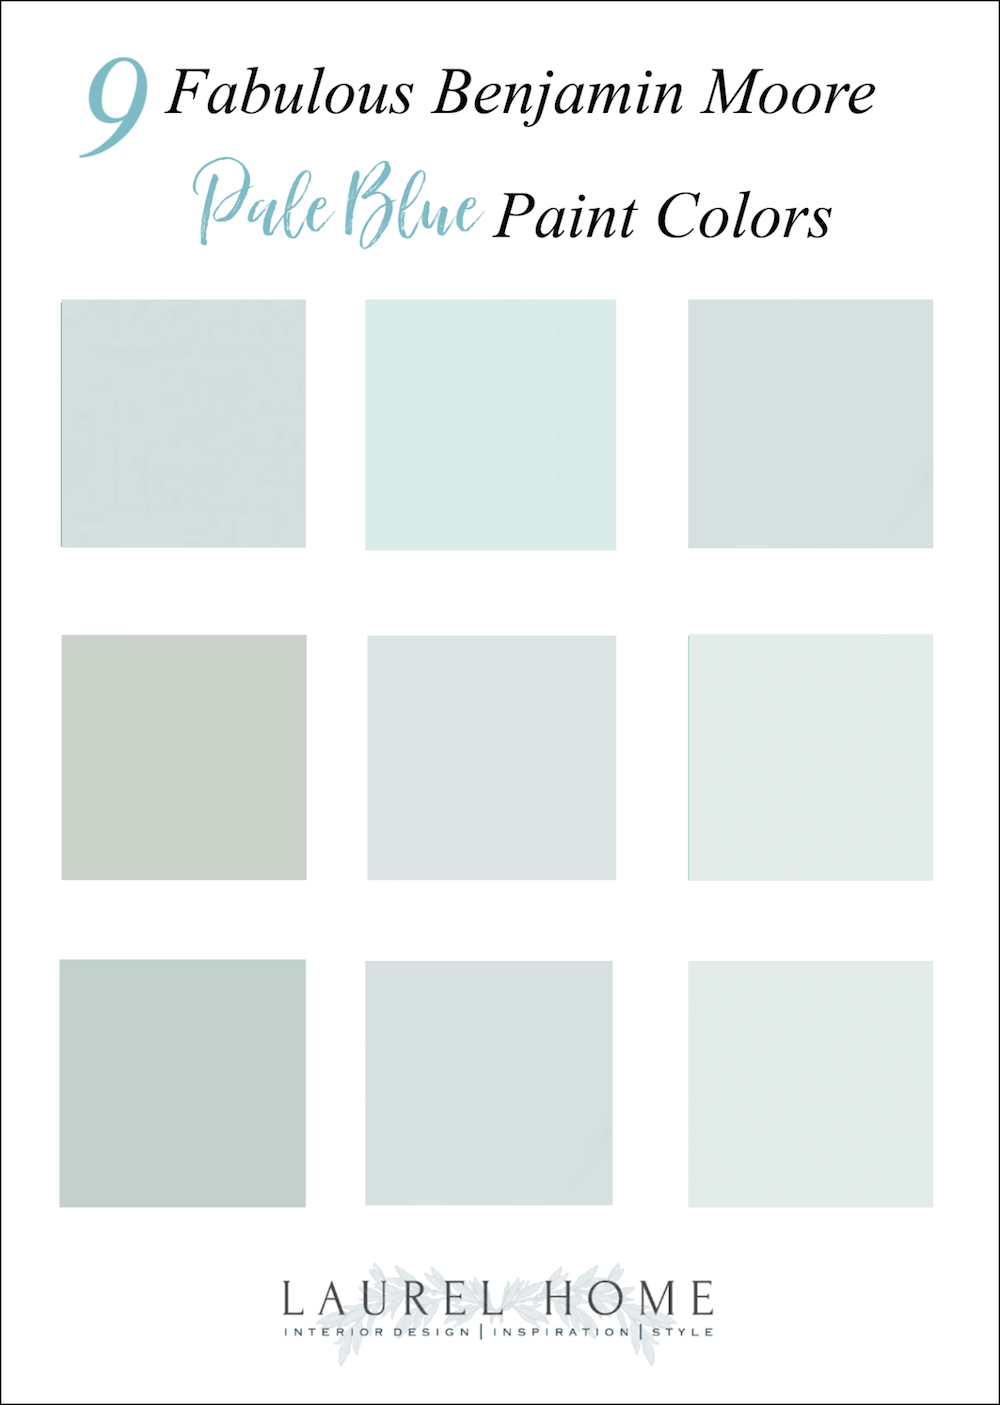 Light Wall Colors-Don't Make This Mistake! - Laurel